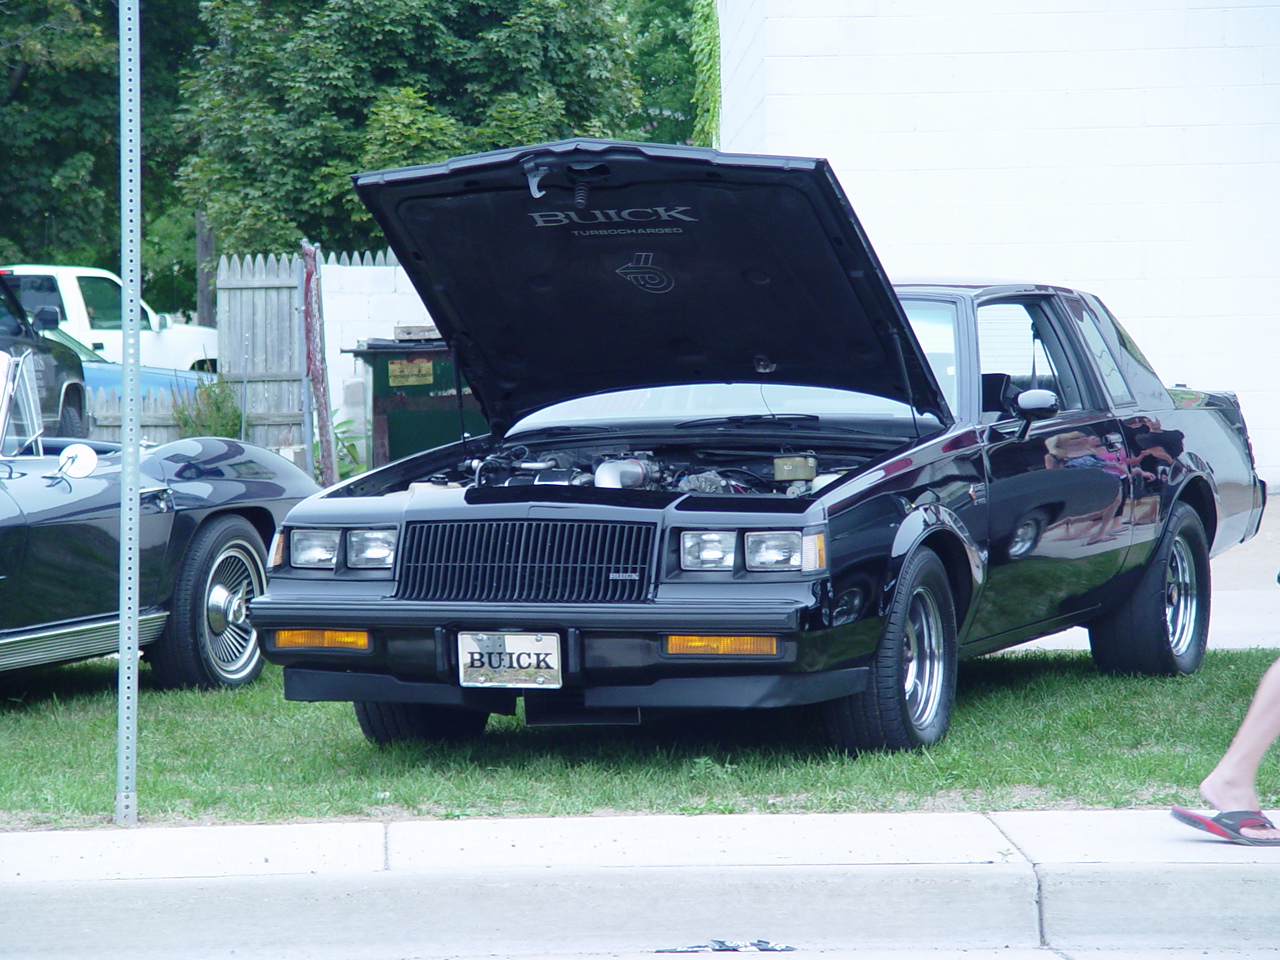 Turbo Buick Regal Grand National at Woodward Dream Cruise